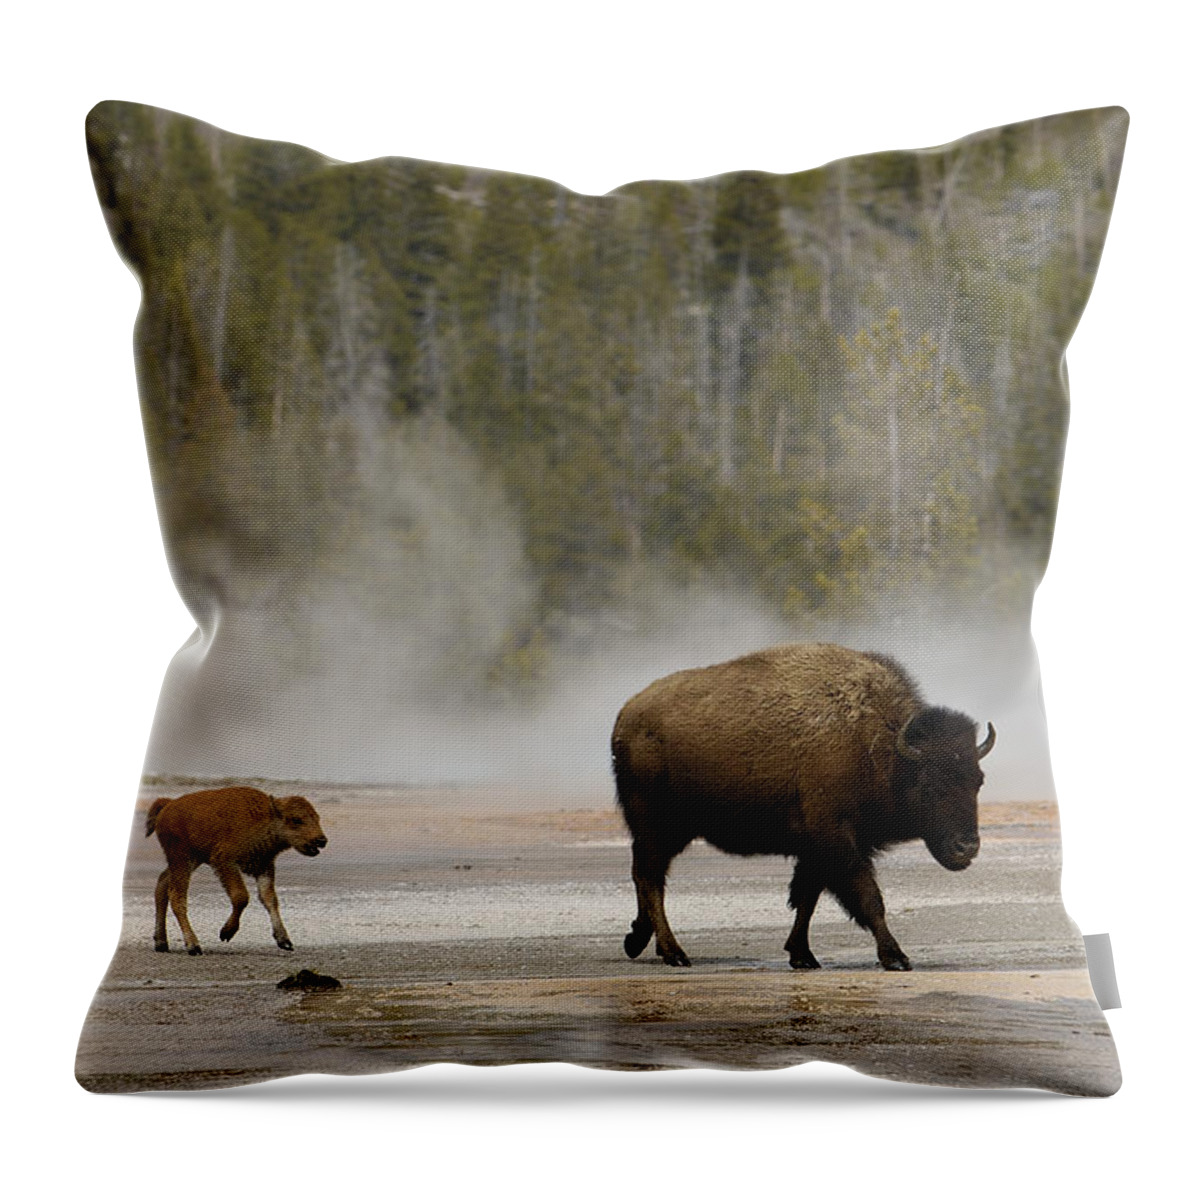 00210680 Throw Pillow featuring the photograph American Bison Mother and Calf by Pete Oxford